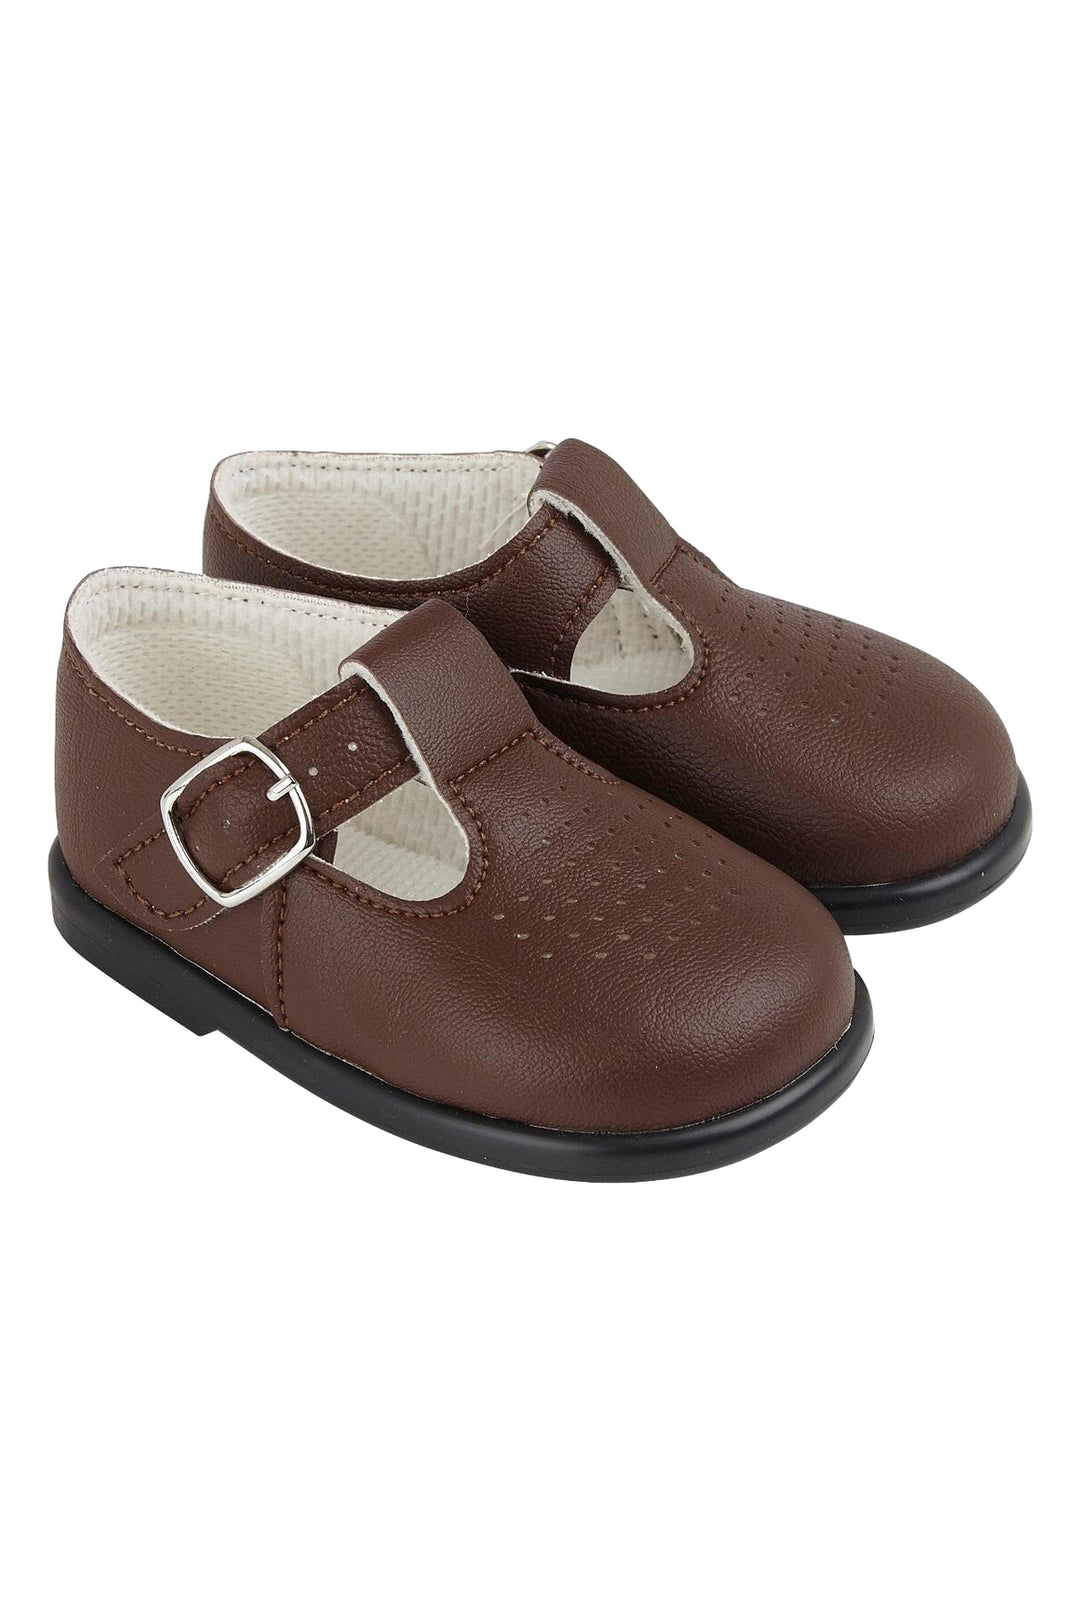 Baypods Brown T-Bar Hard Sole Shoes | Millie and John